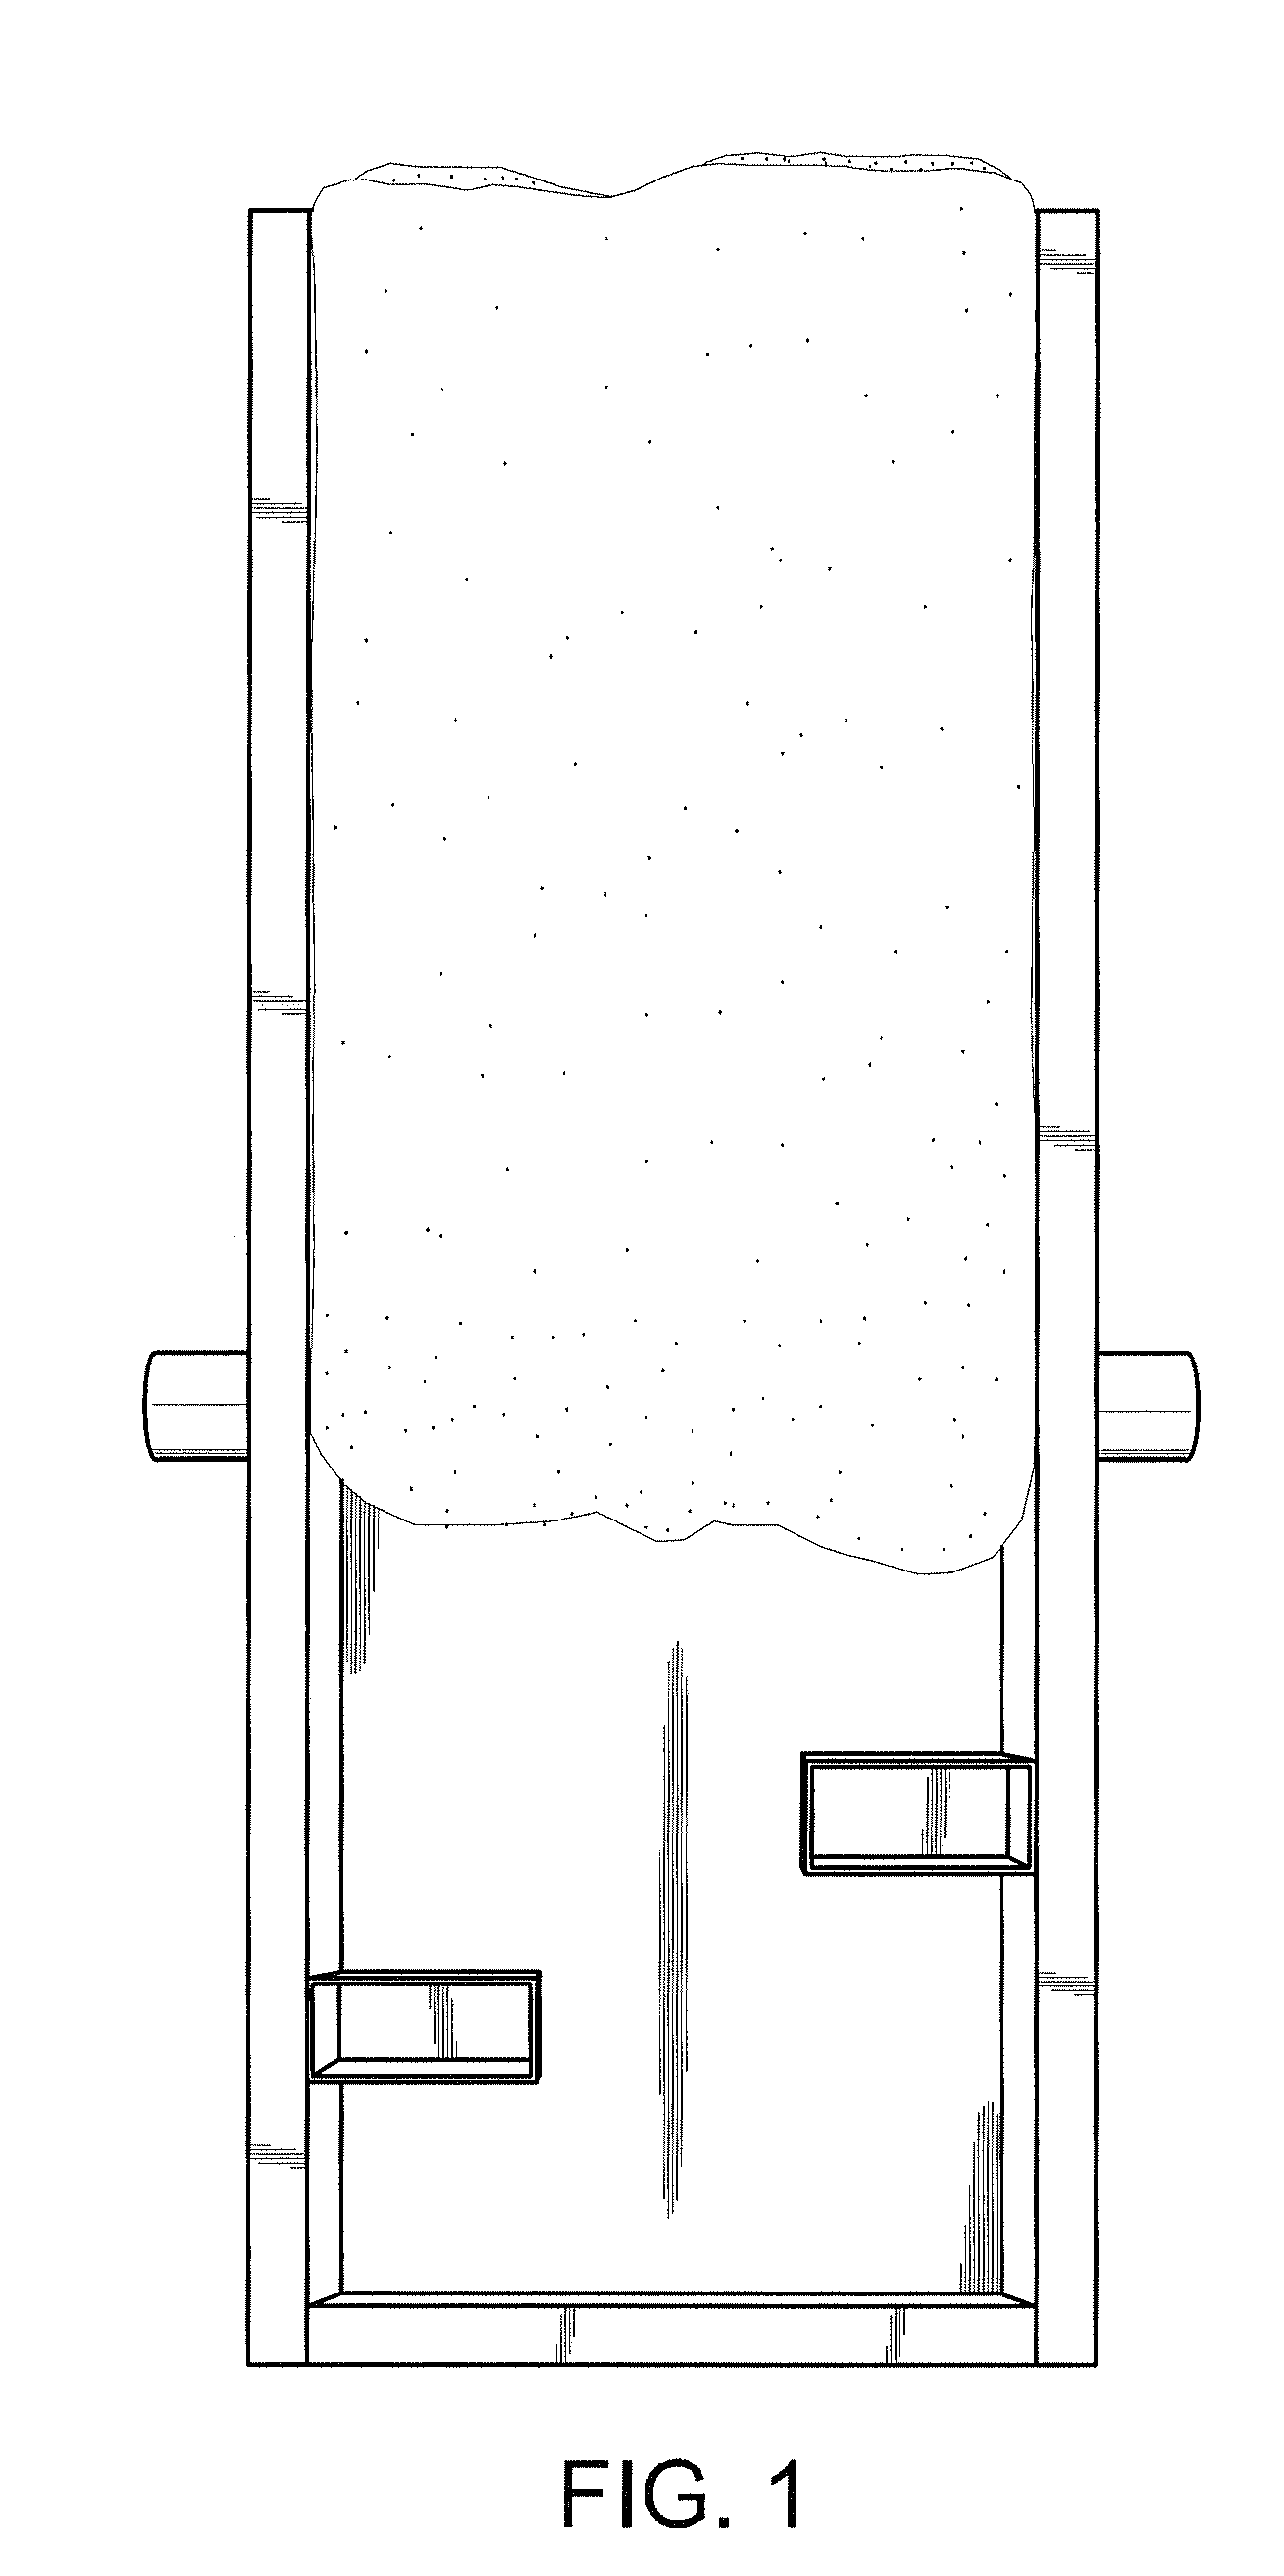 Method for filling wall cavities with expanding foam insulation